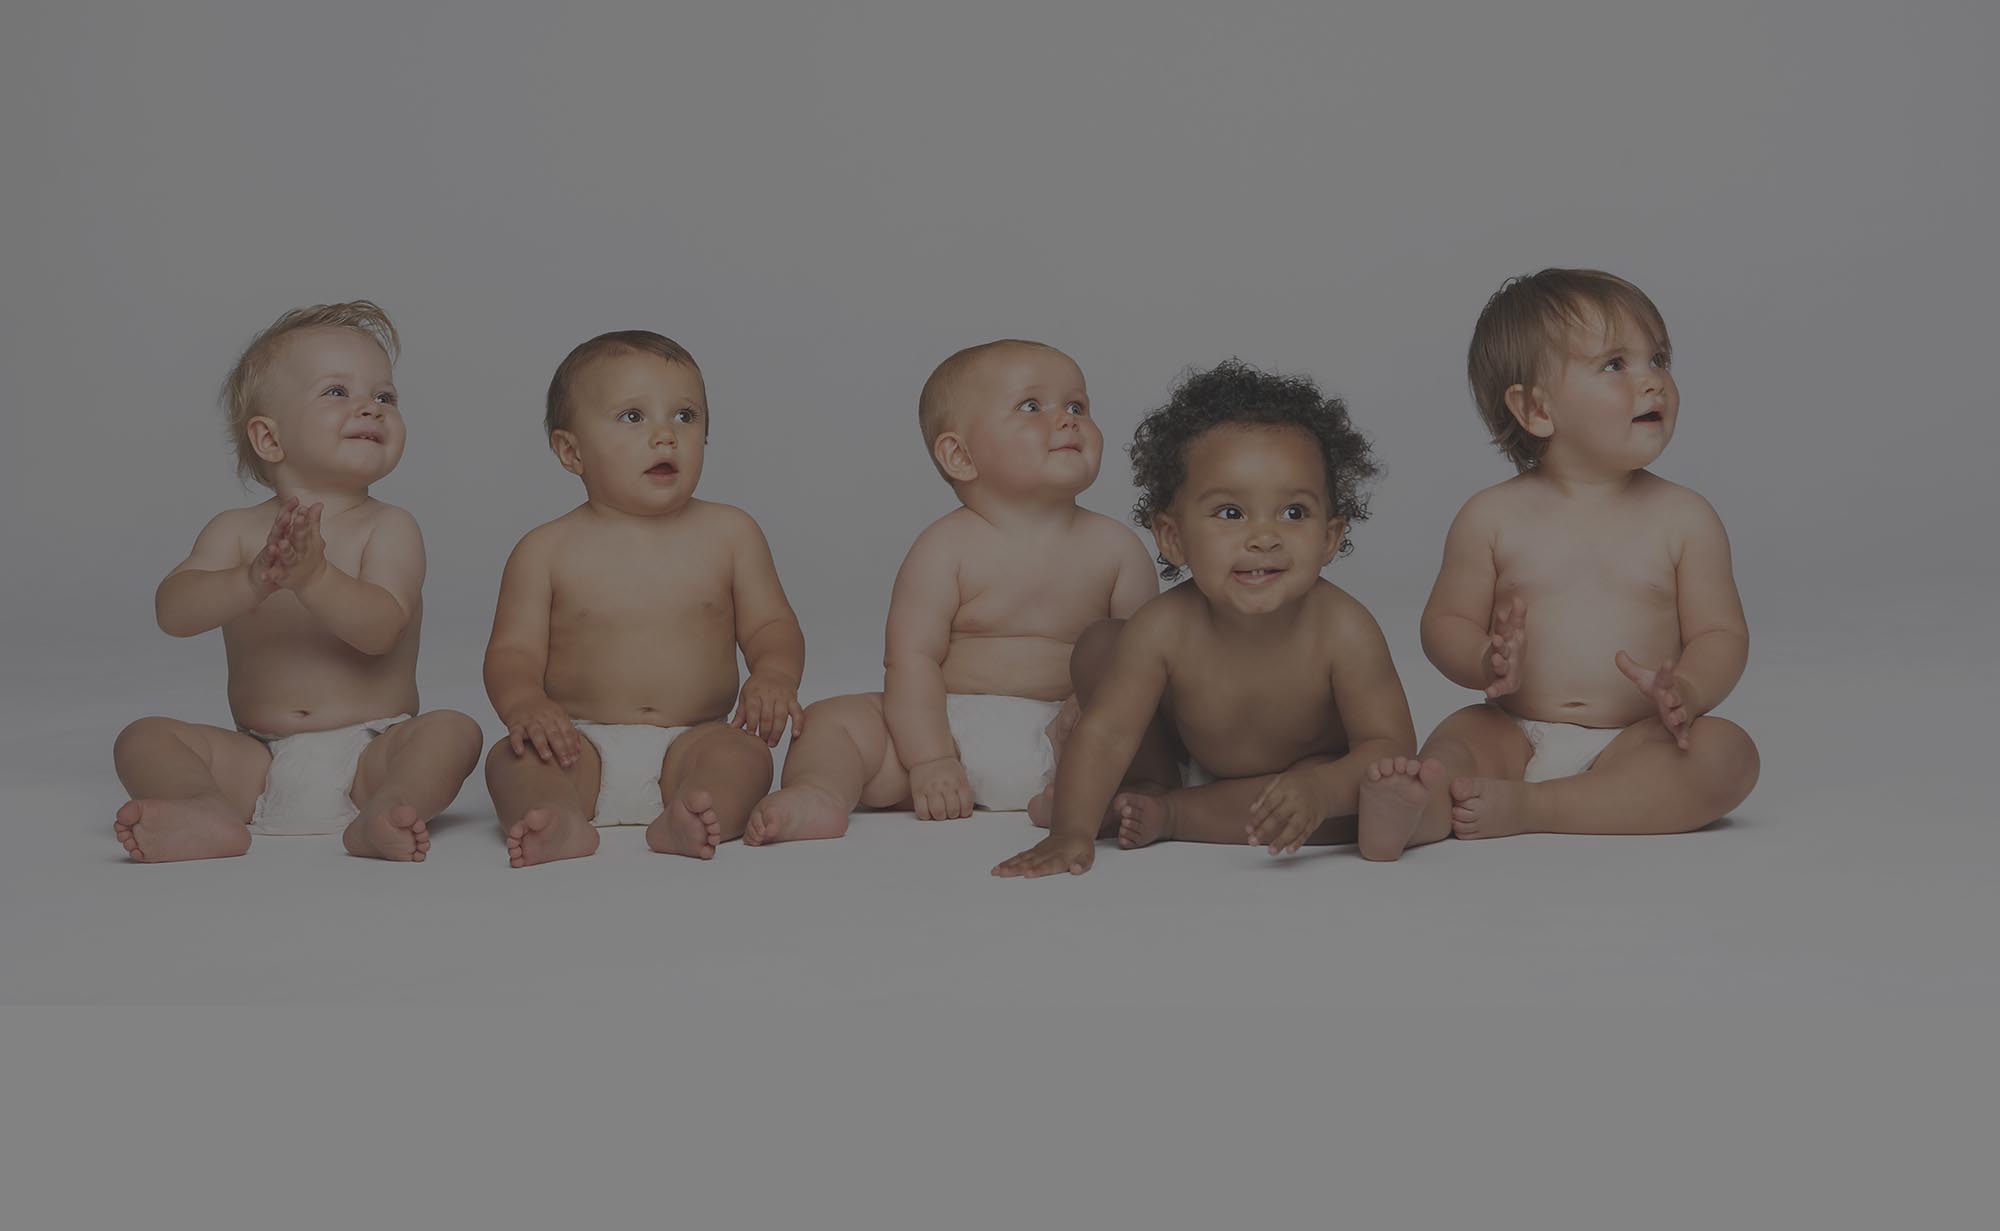 Austin pediatric chiropracti clinic, pciture of 5 cute babies in diapers